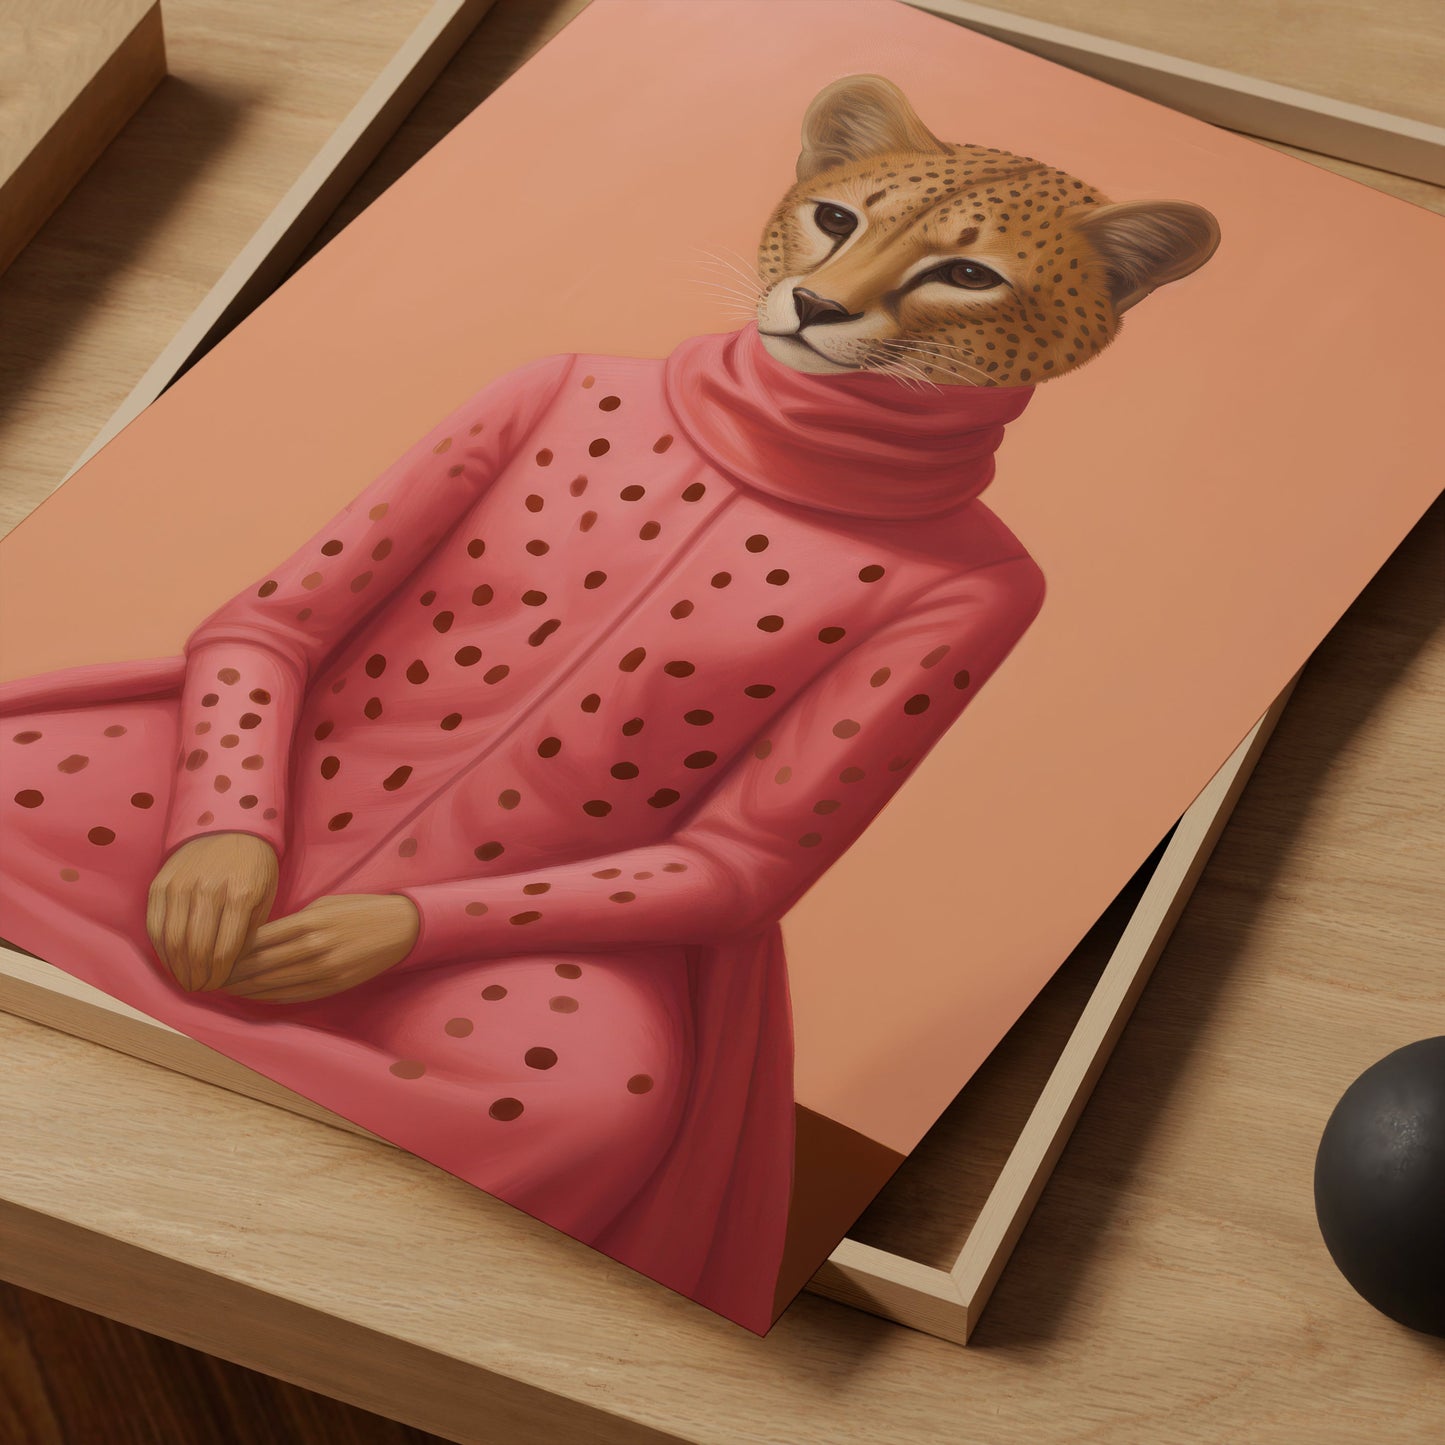 a painting of a cat wearing a pink sweater